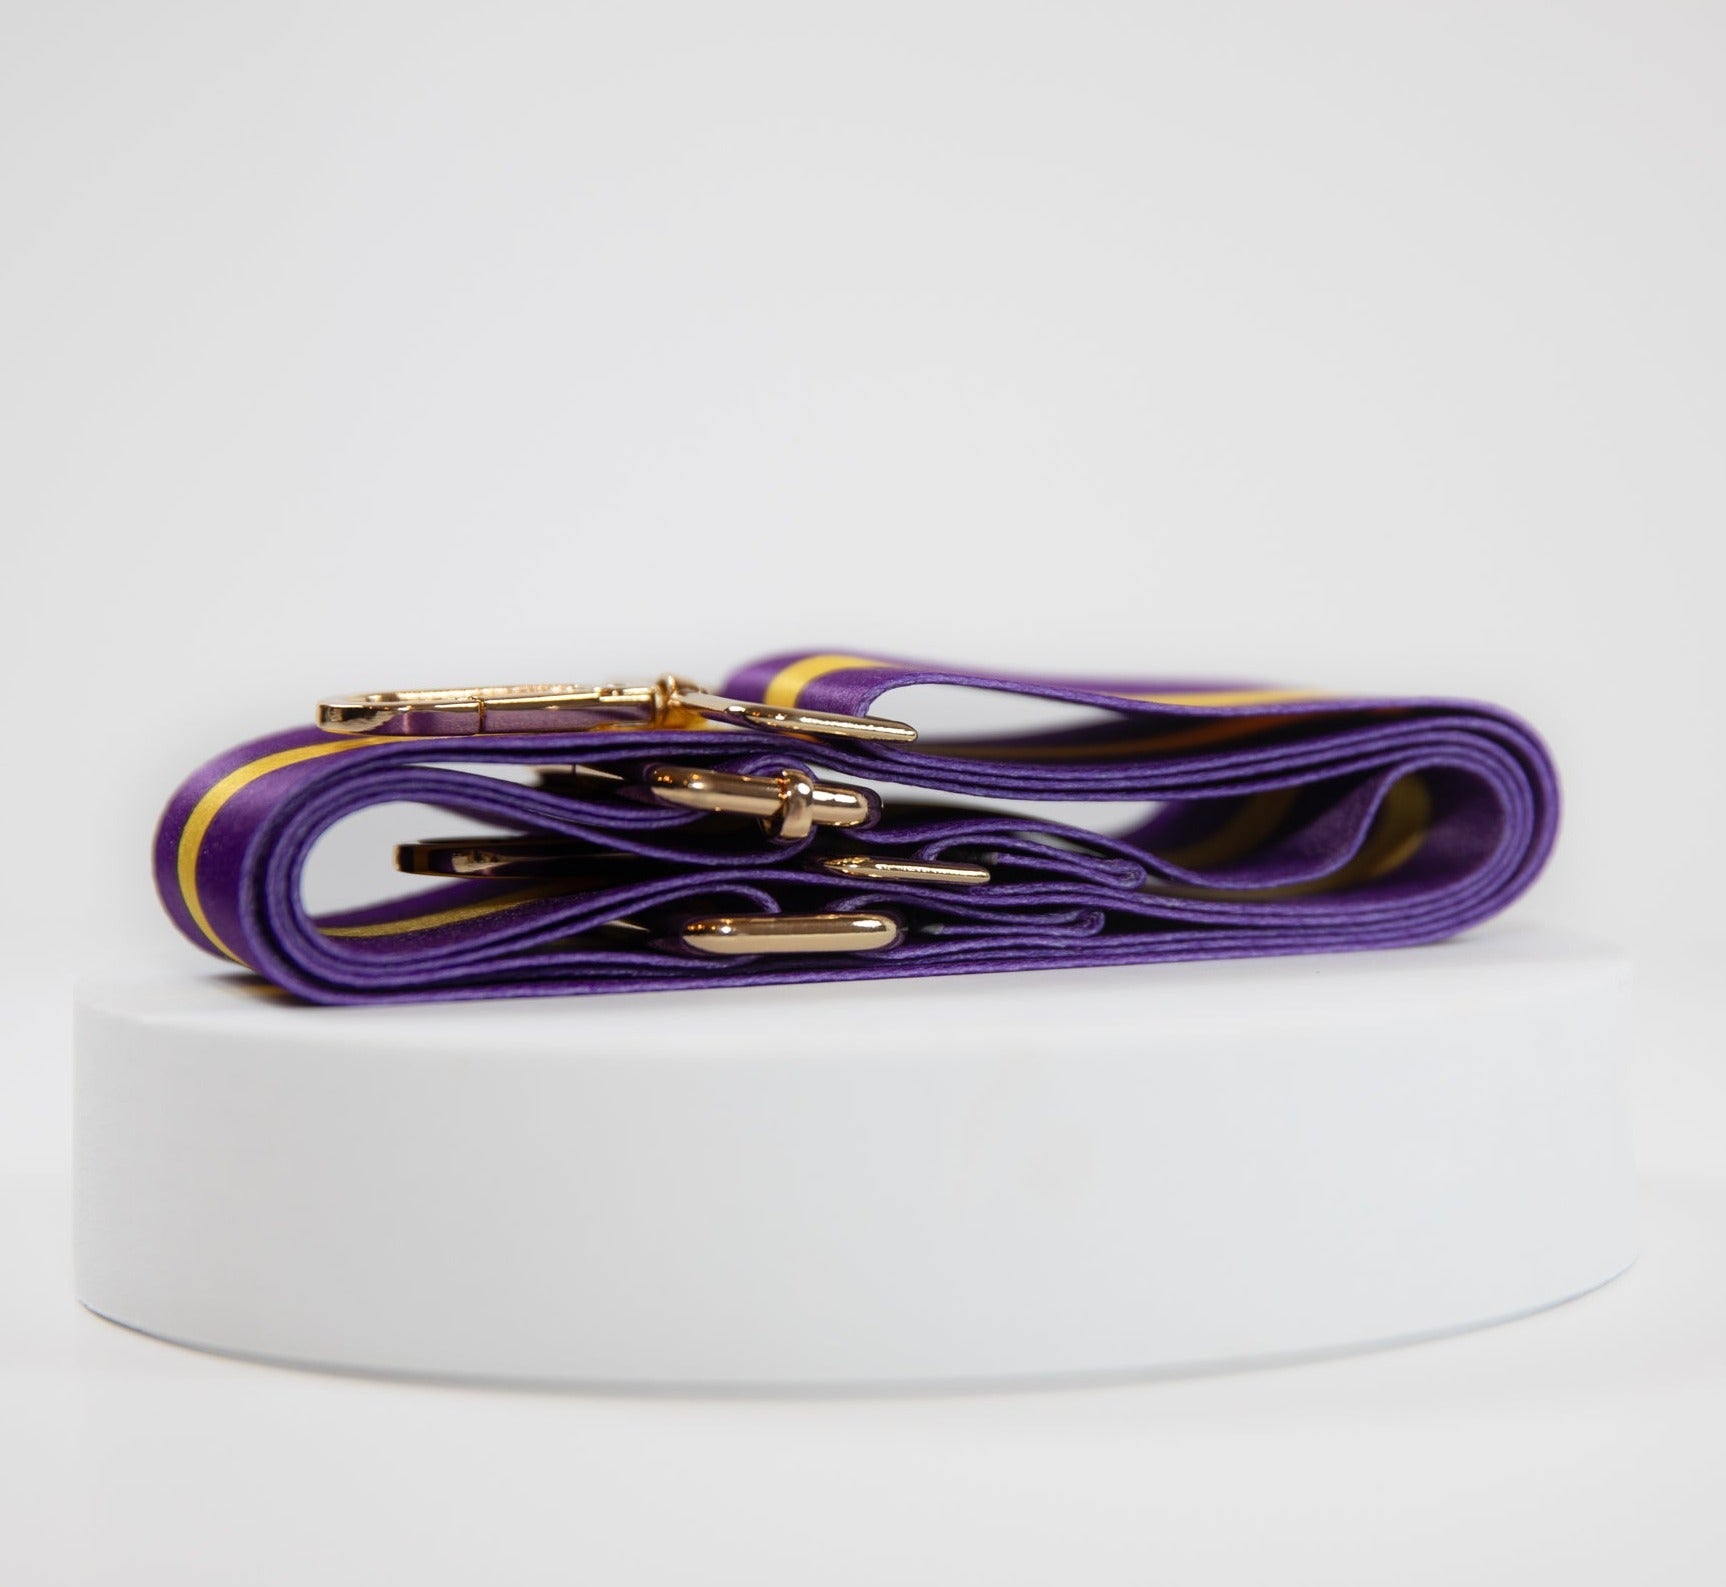 Elegant crossbody strap shown in LSU Tigers team colors of purple and gold.